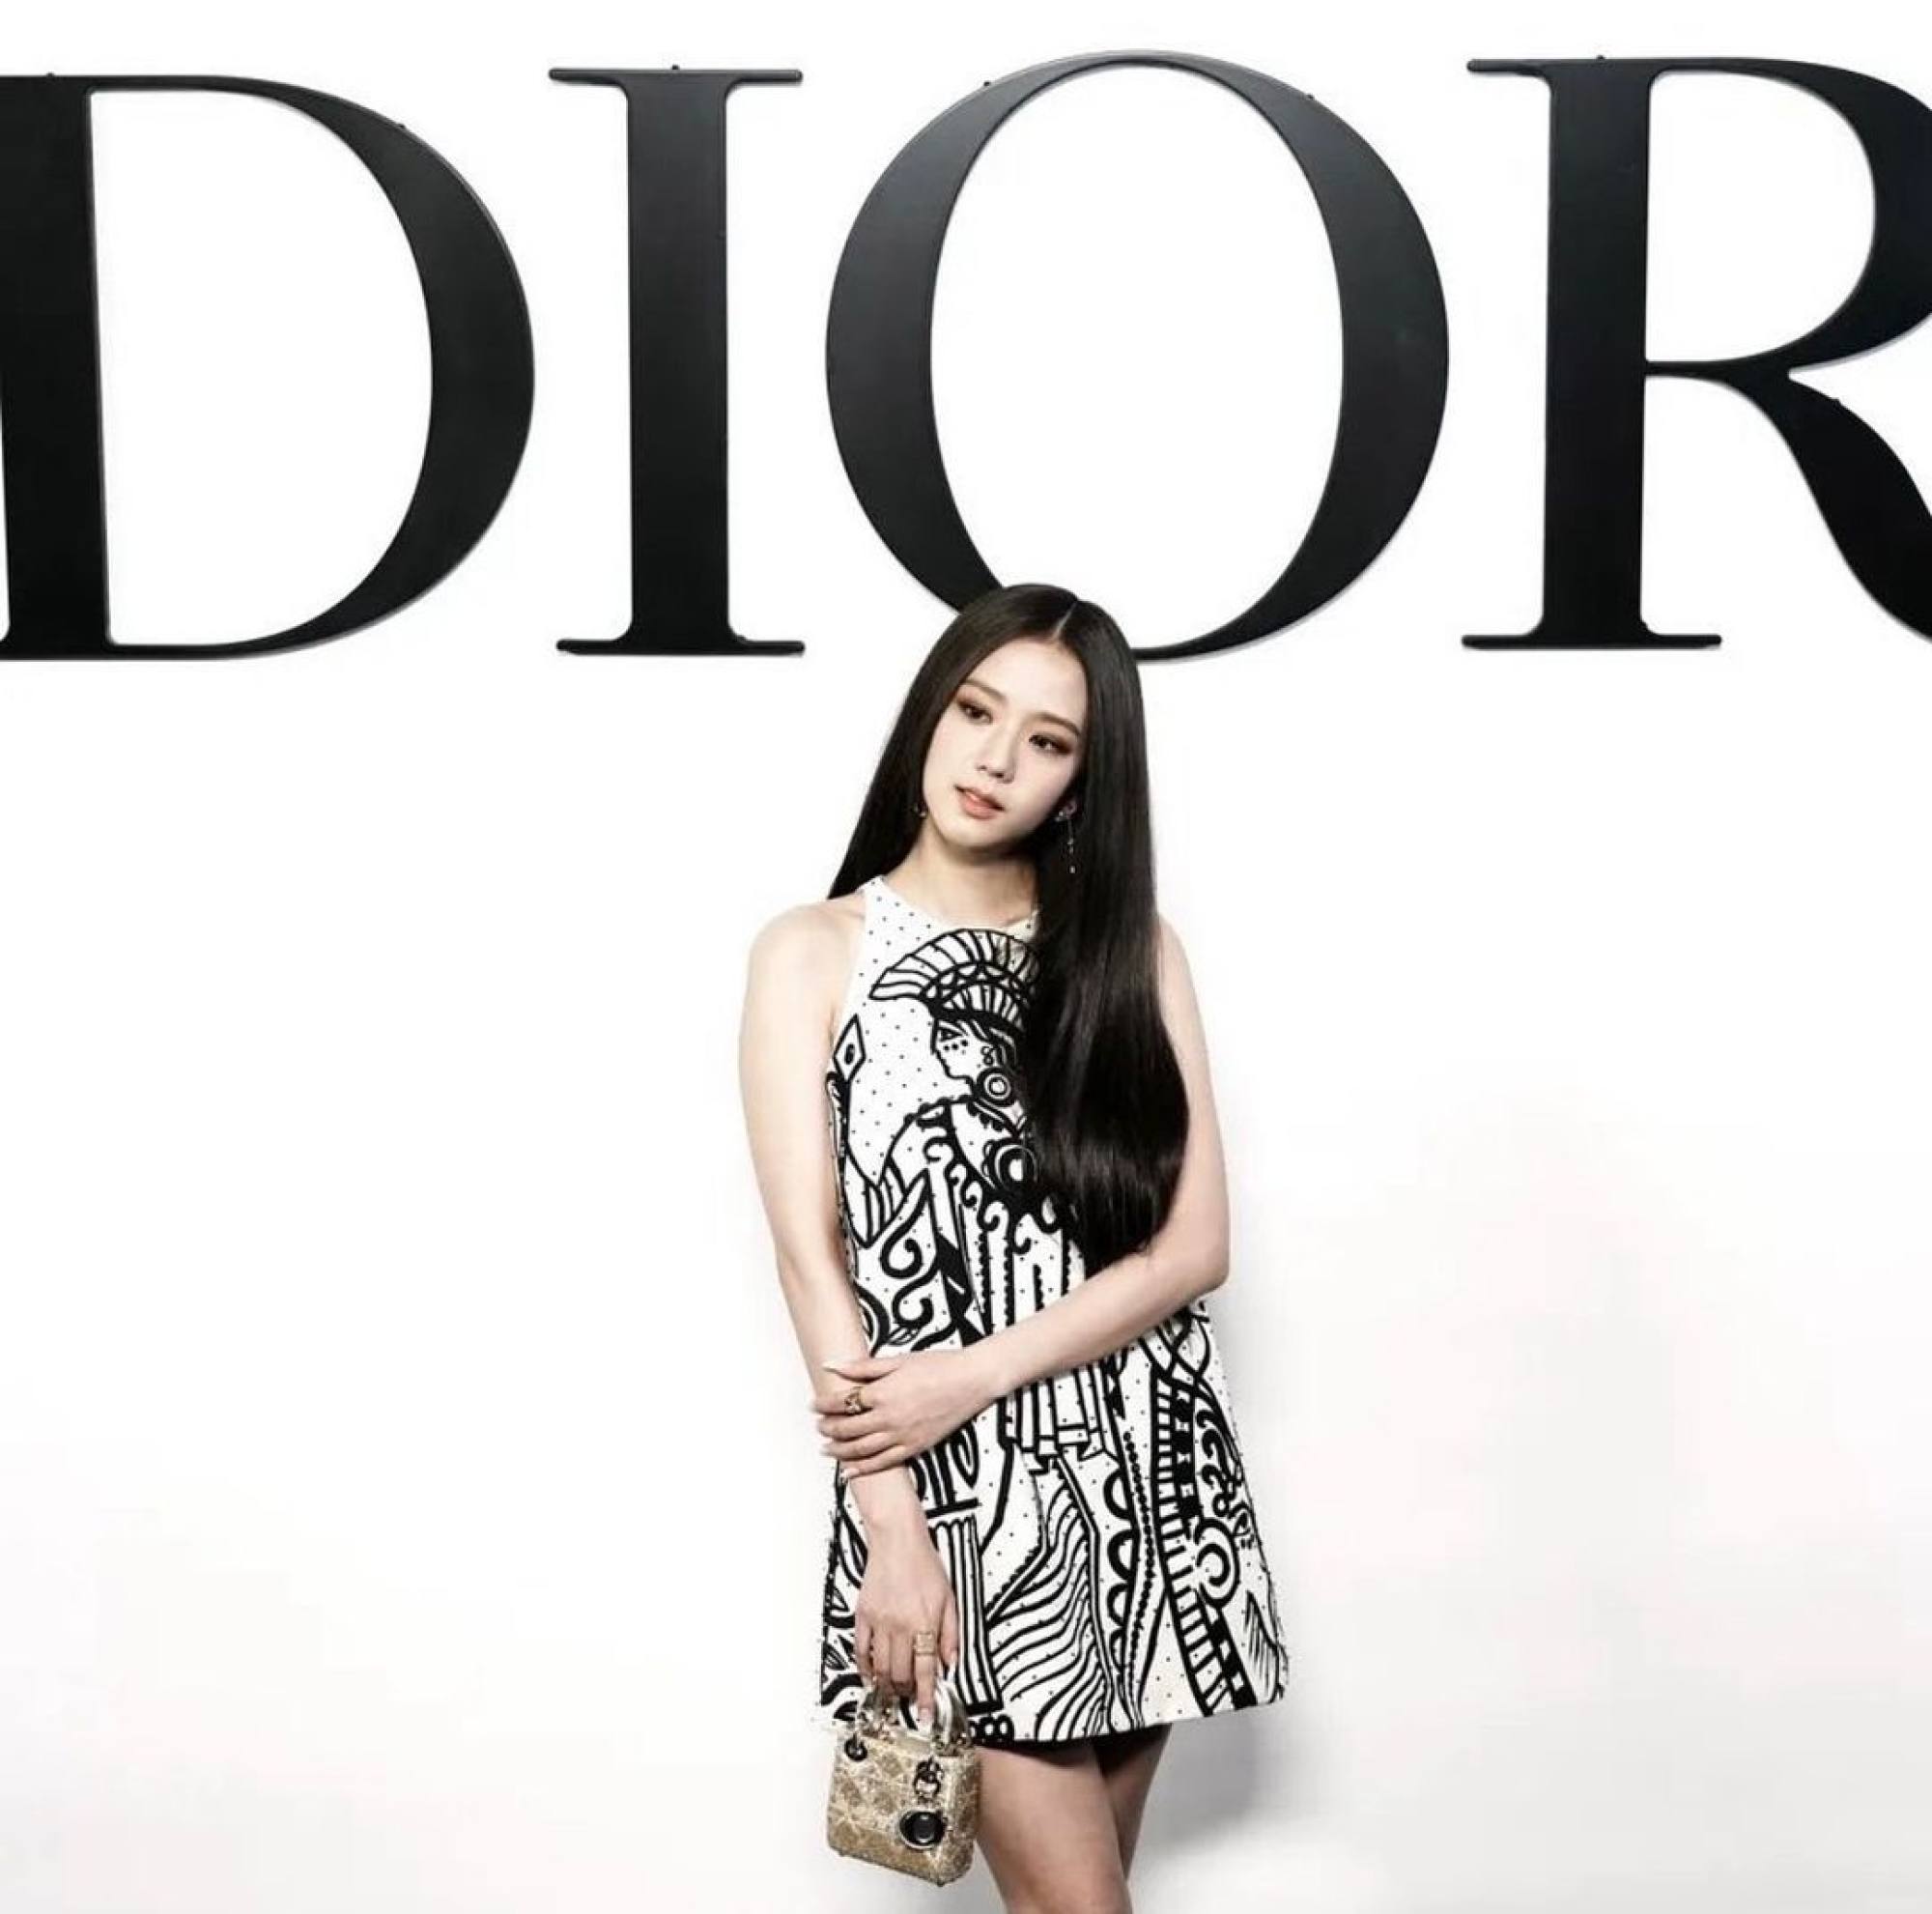 BTS Jimin is the new Dior global ambassador and it is official